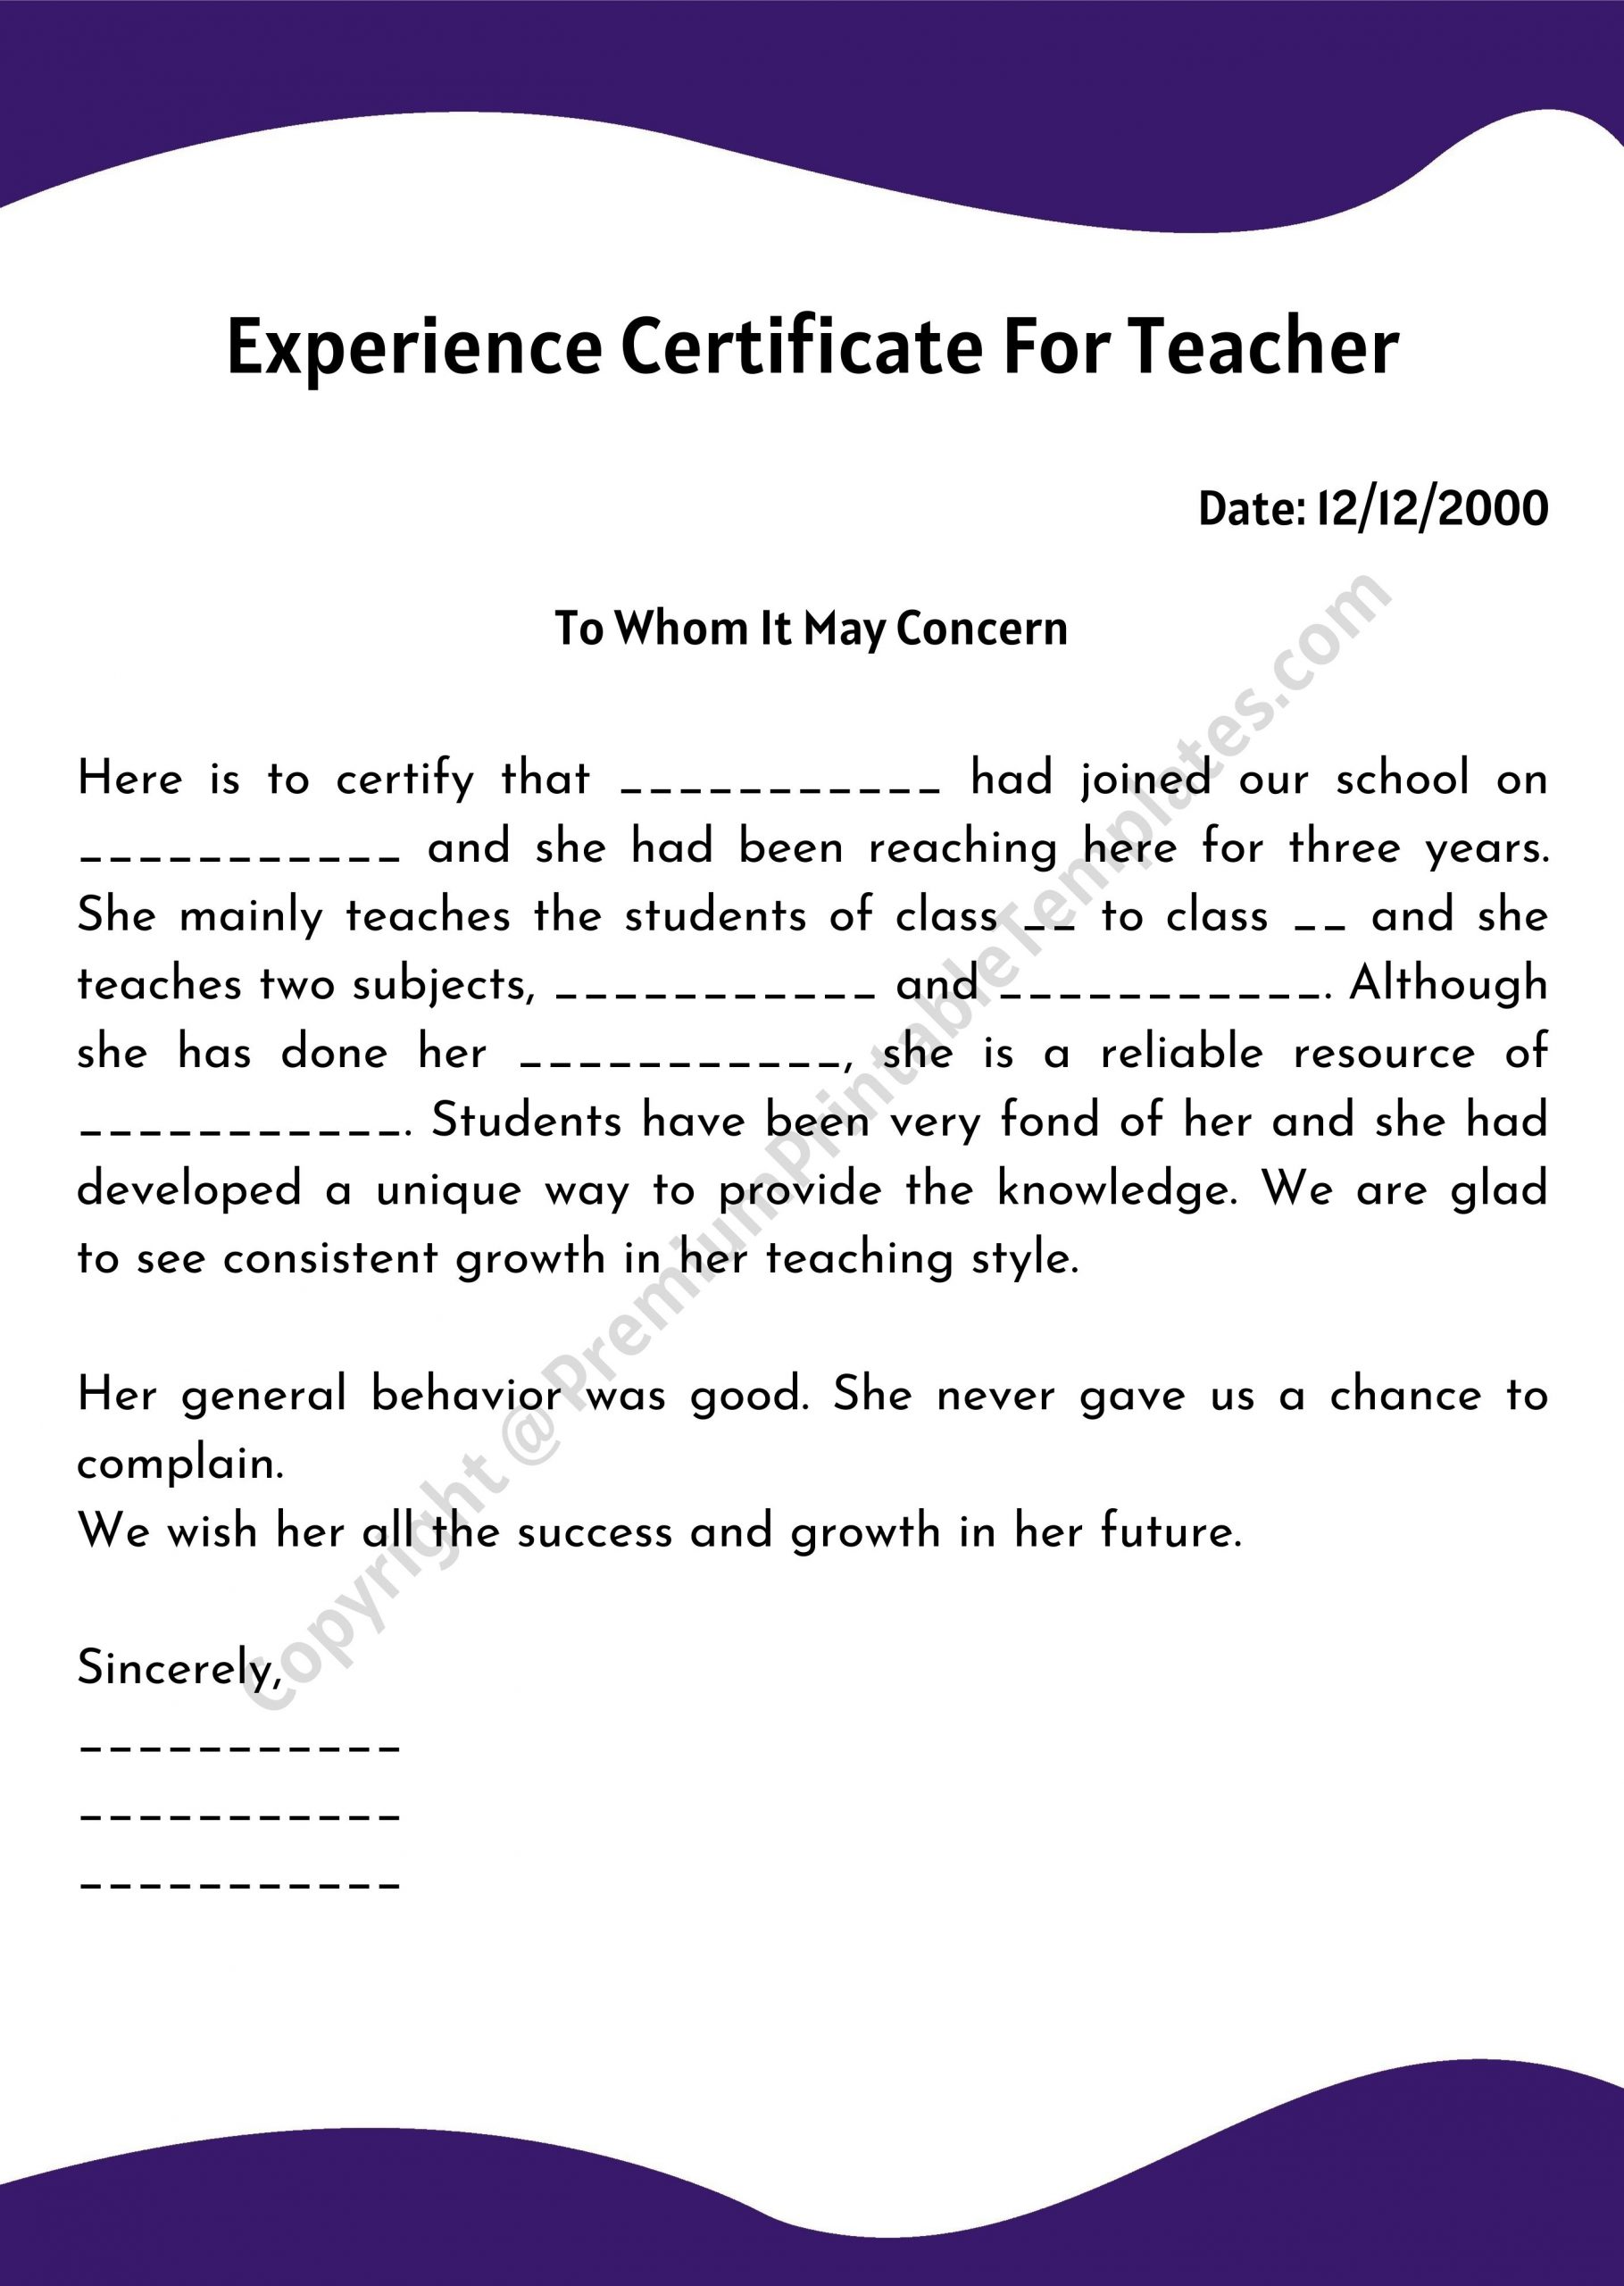 work experience certificate letter format